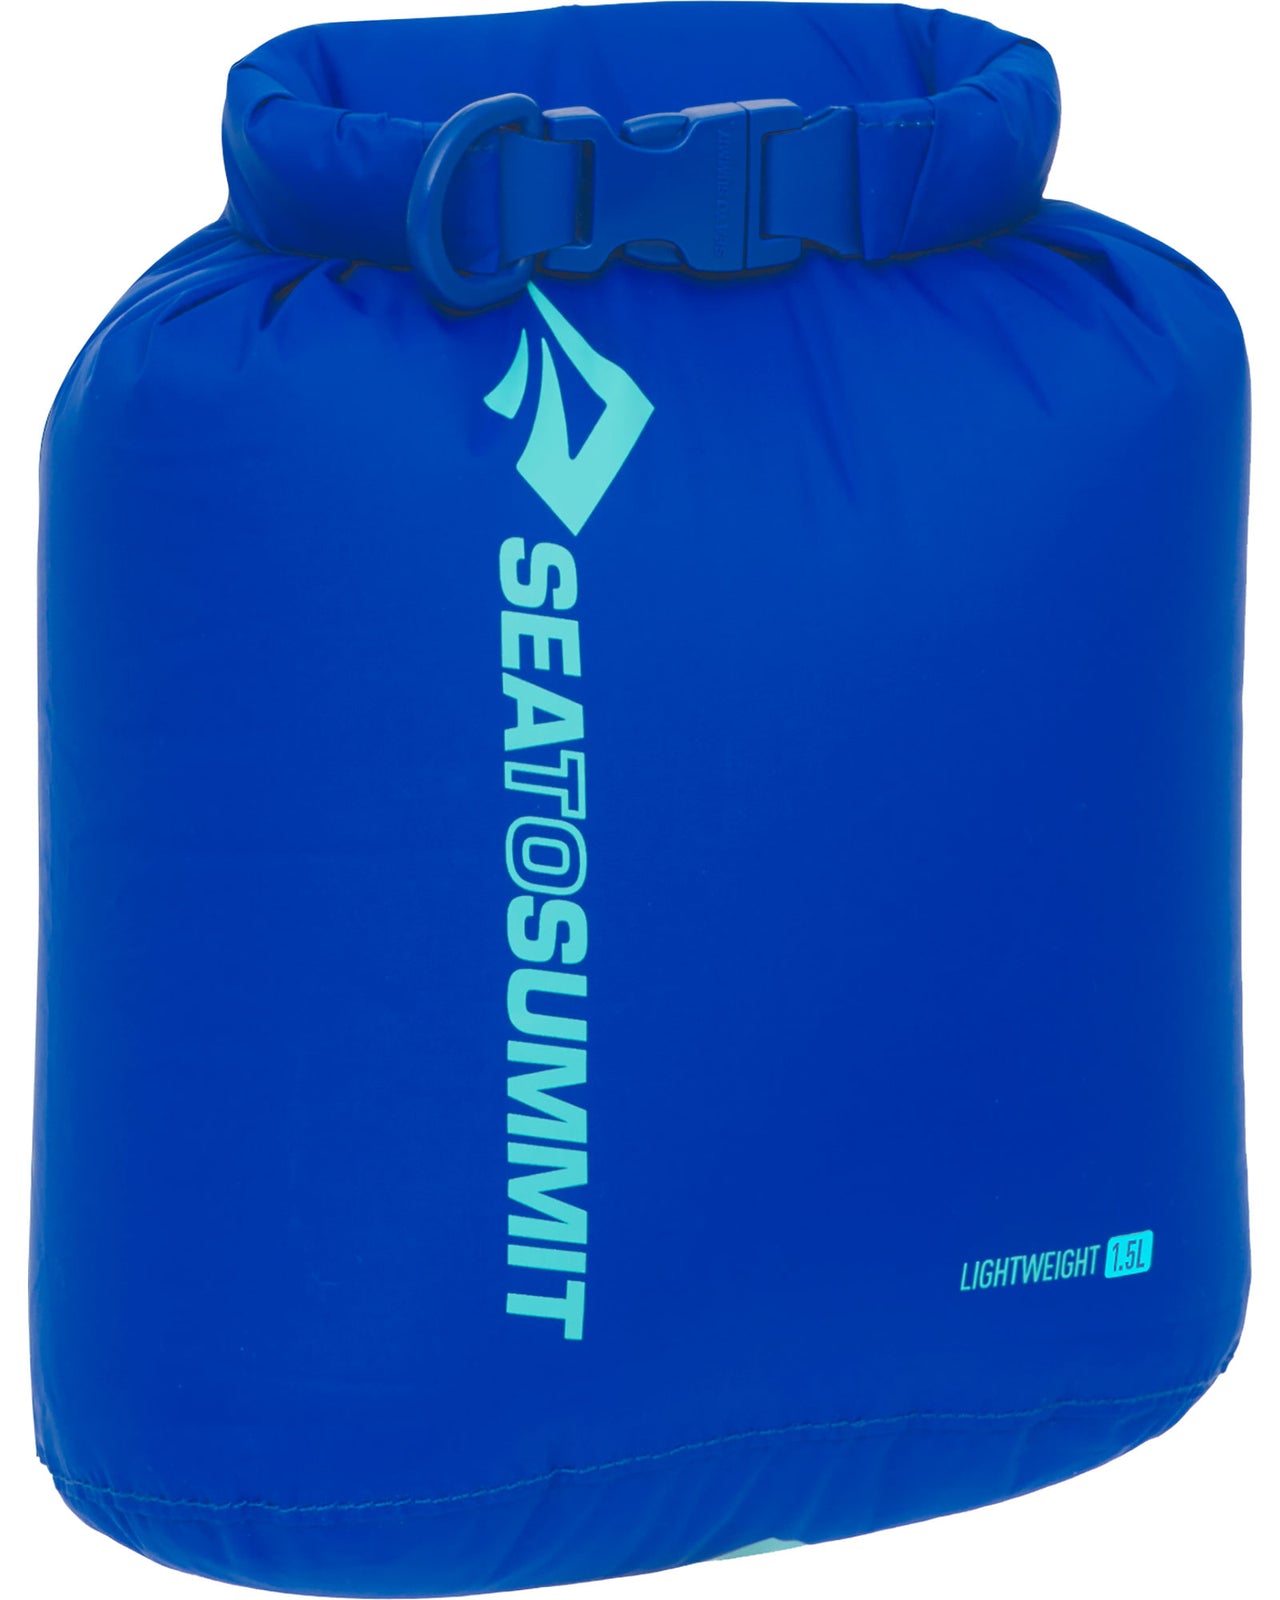 Sea to Summit Lightweight Dry Bag 1.5L Dry Bags 0